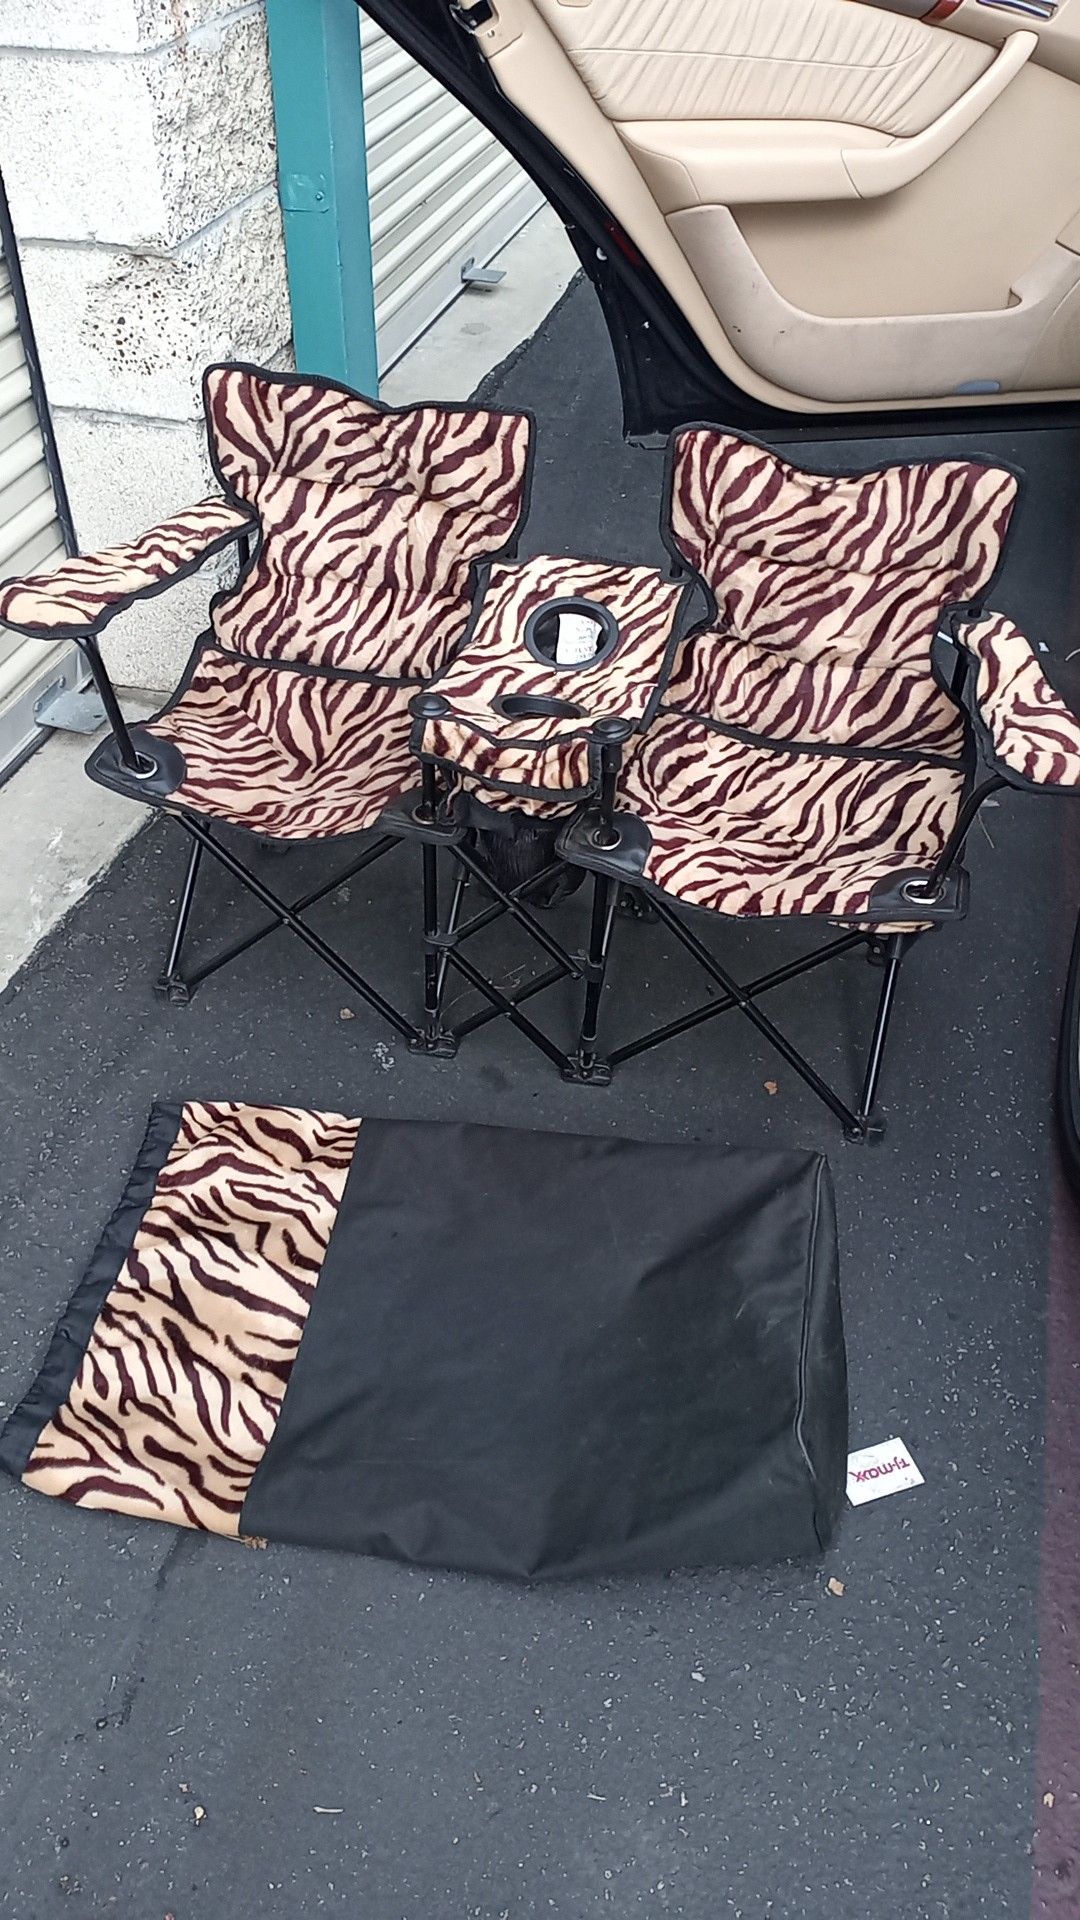 Kids double chair for zebra-striped